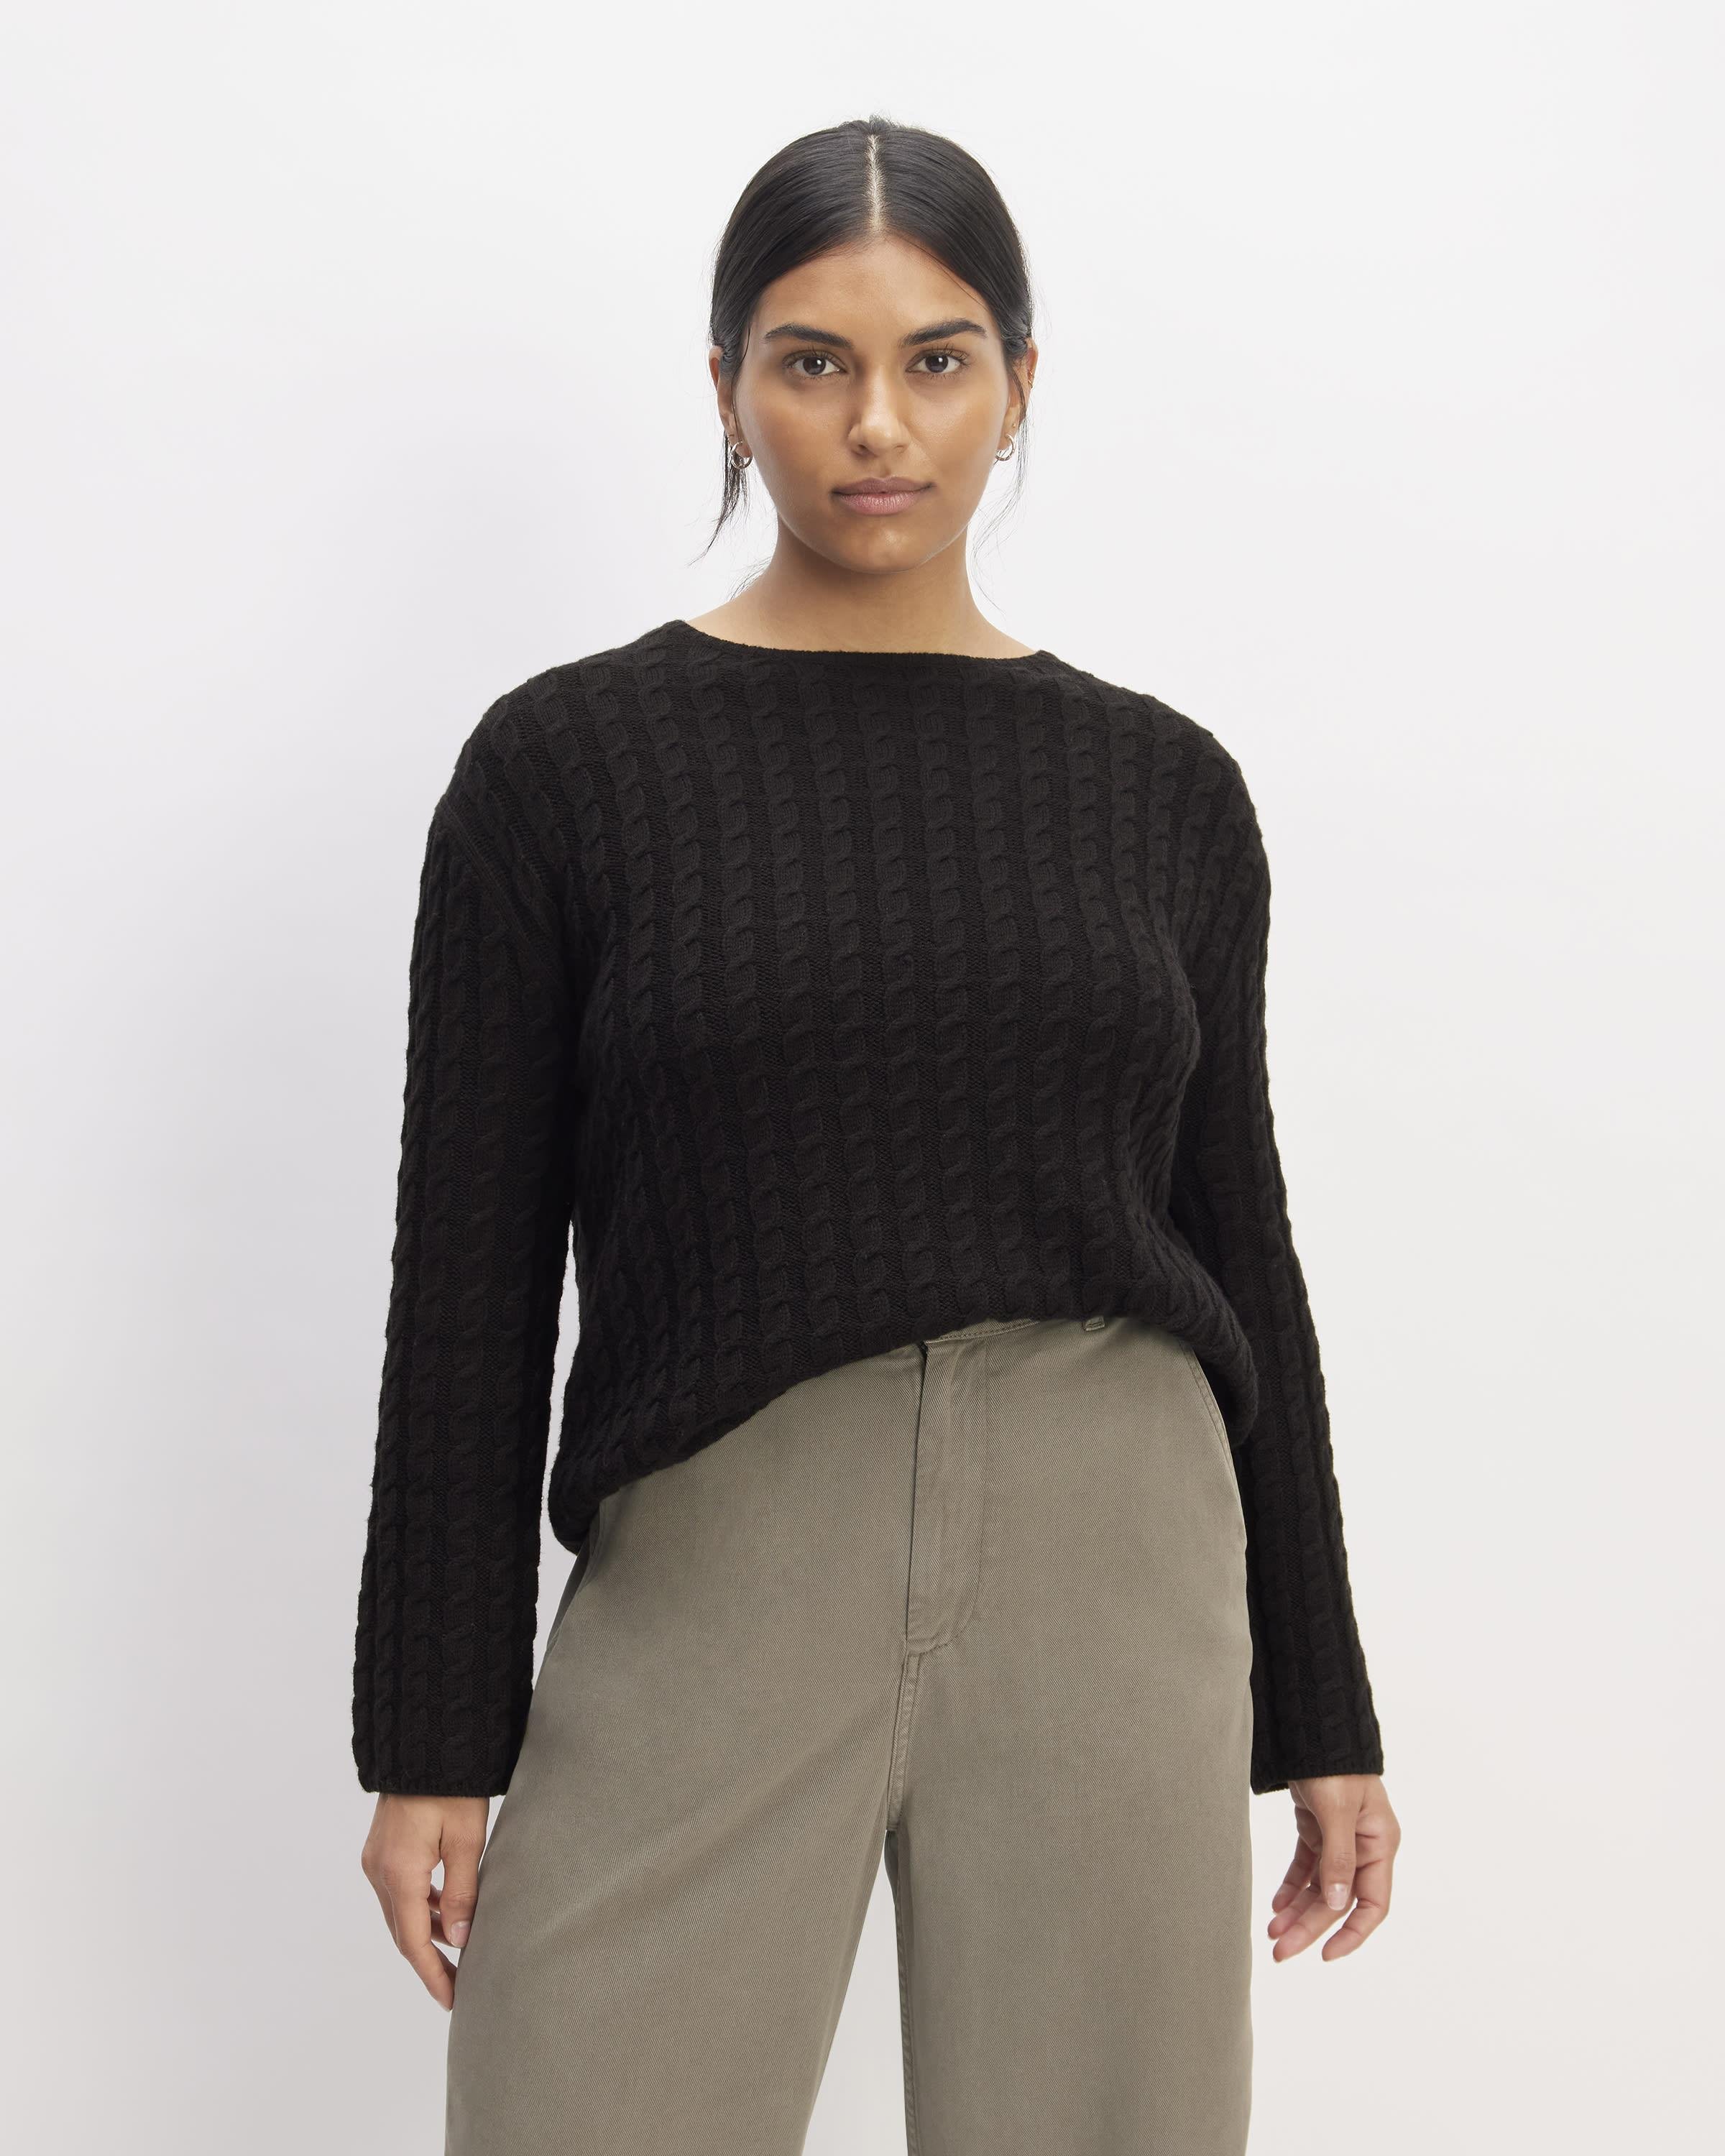 The Cotton Merino Cable Crew by EVERLANE